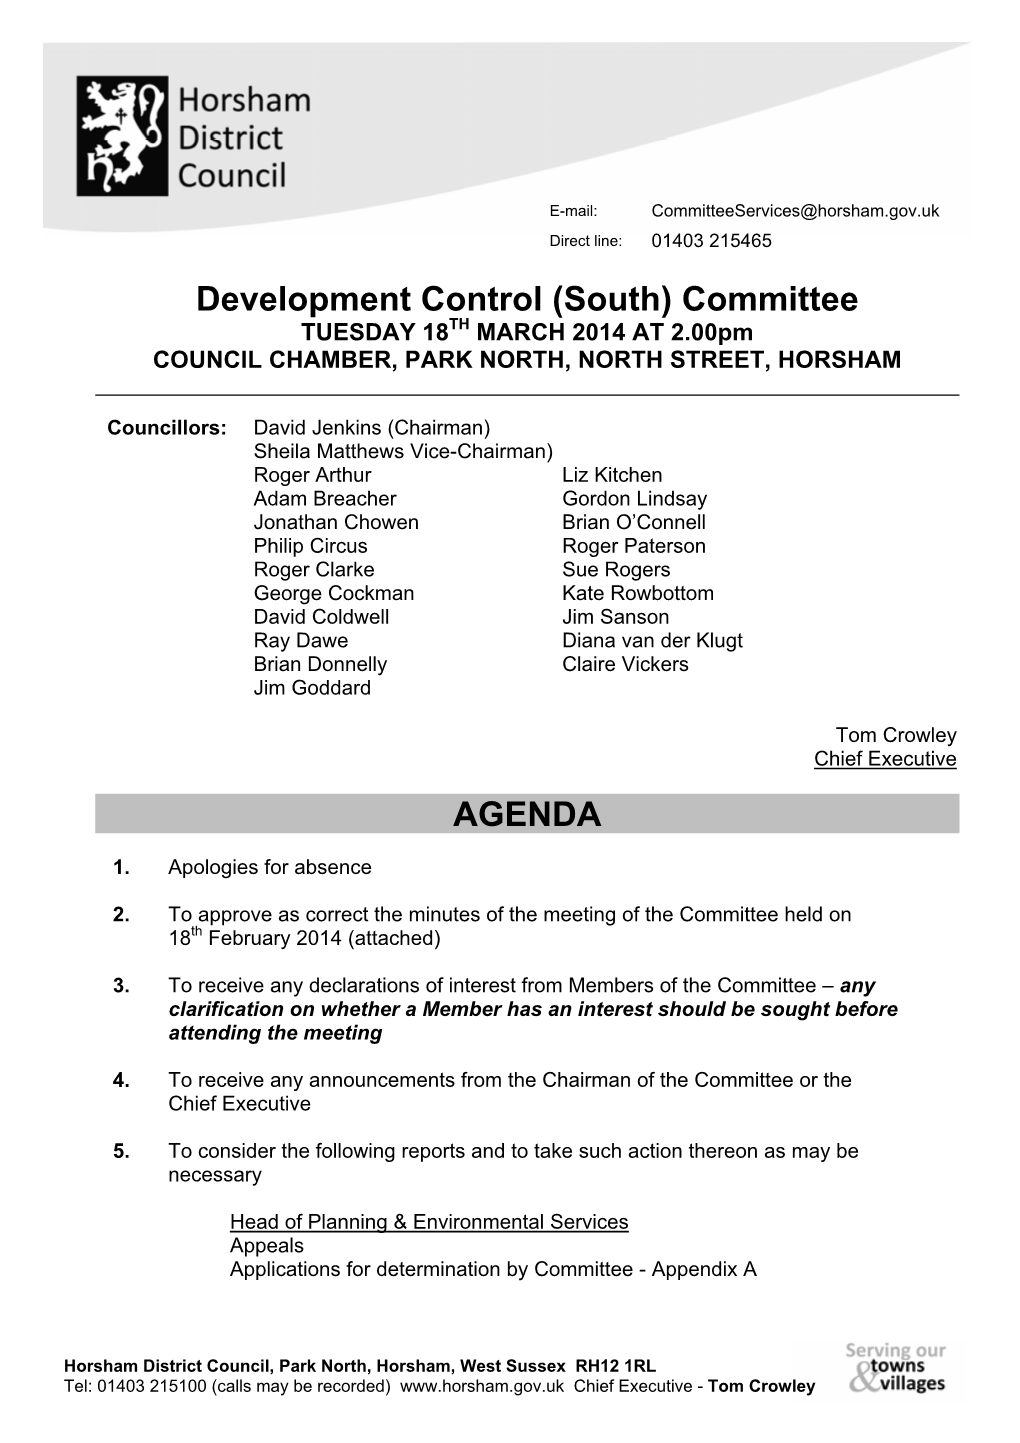 Development Control (South) Committee TUESDAY 18TH MARCH 2014 at 2.00Pm COUNCIL CHAMBER, PARK NORTH, NORTH STREET, HORSHAM